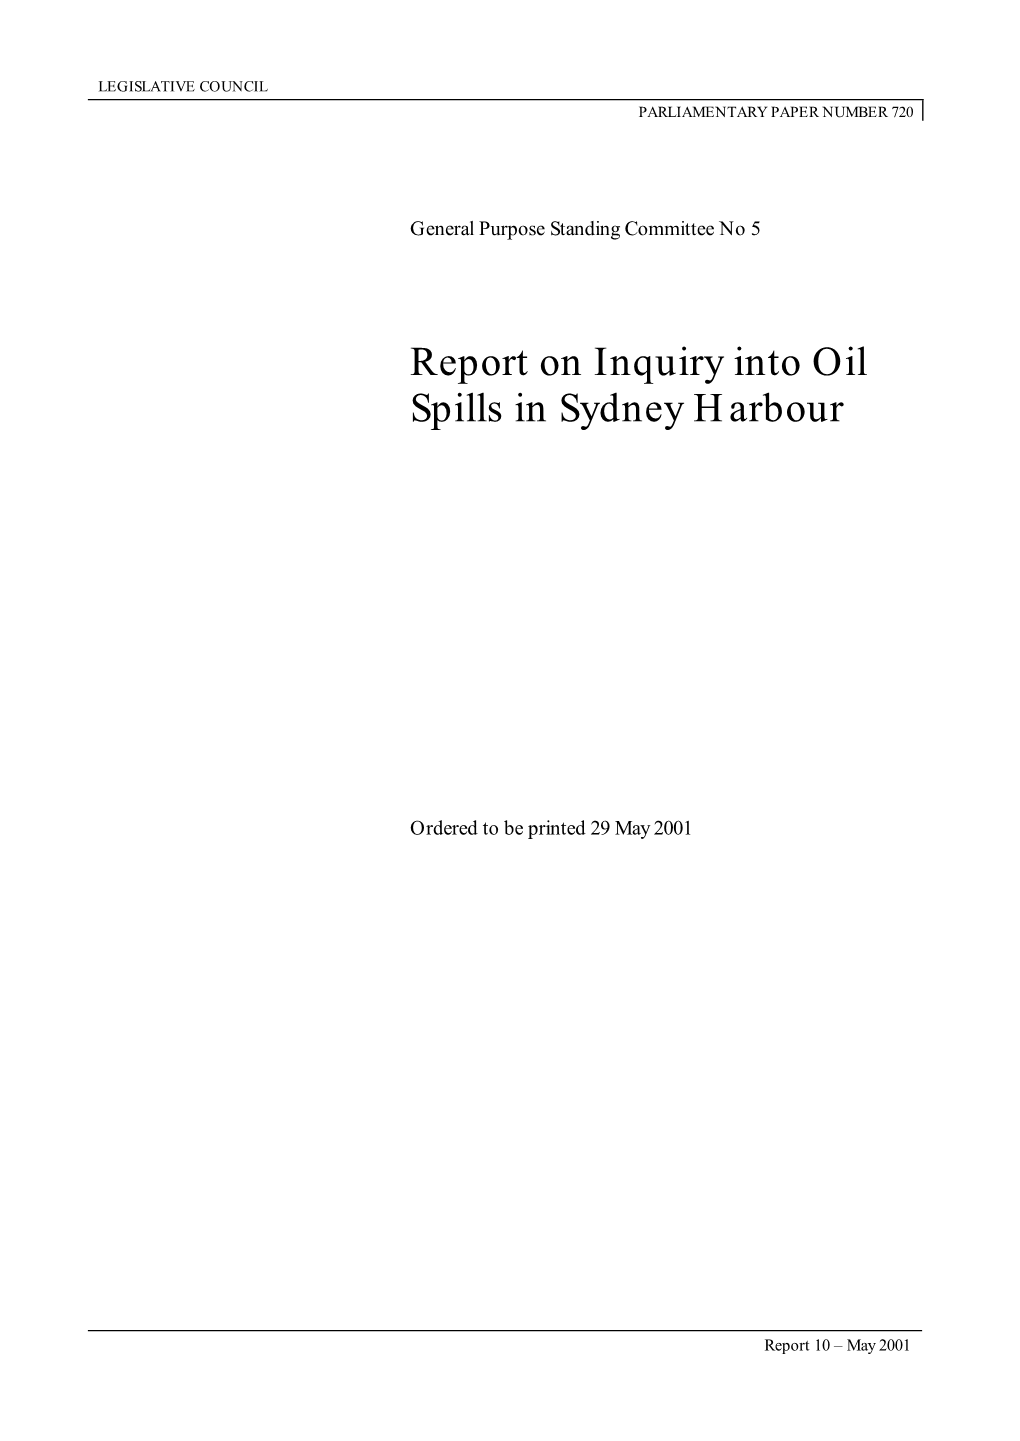 Report on Inquiry Into Oil Spills in Sydney Harbour